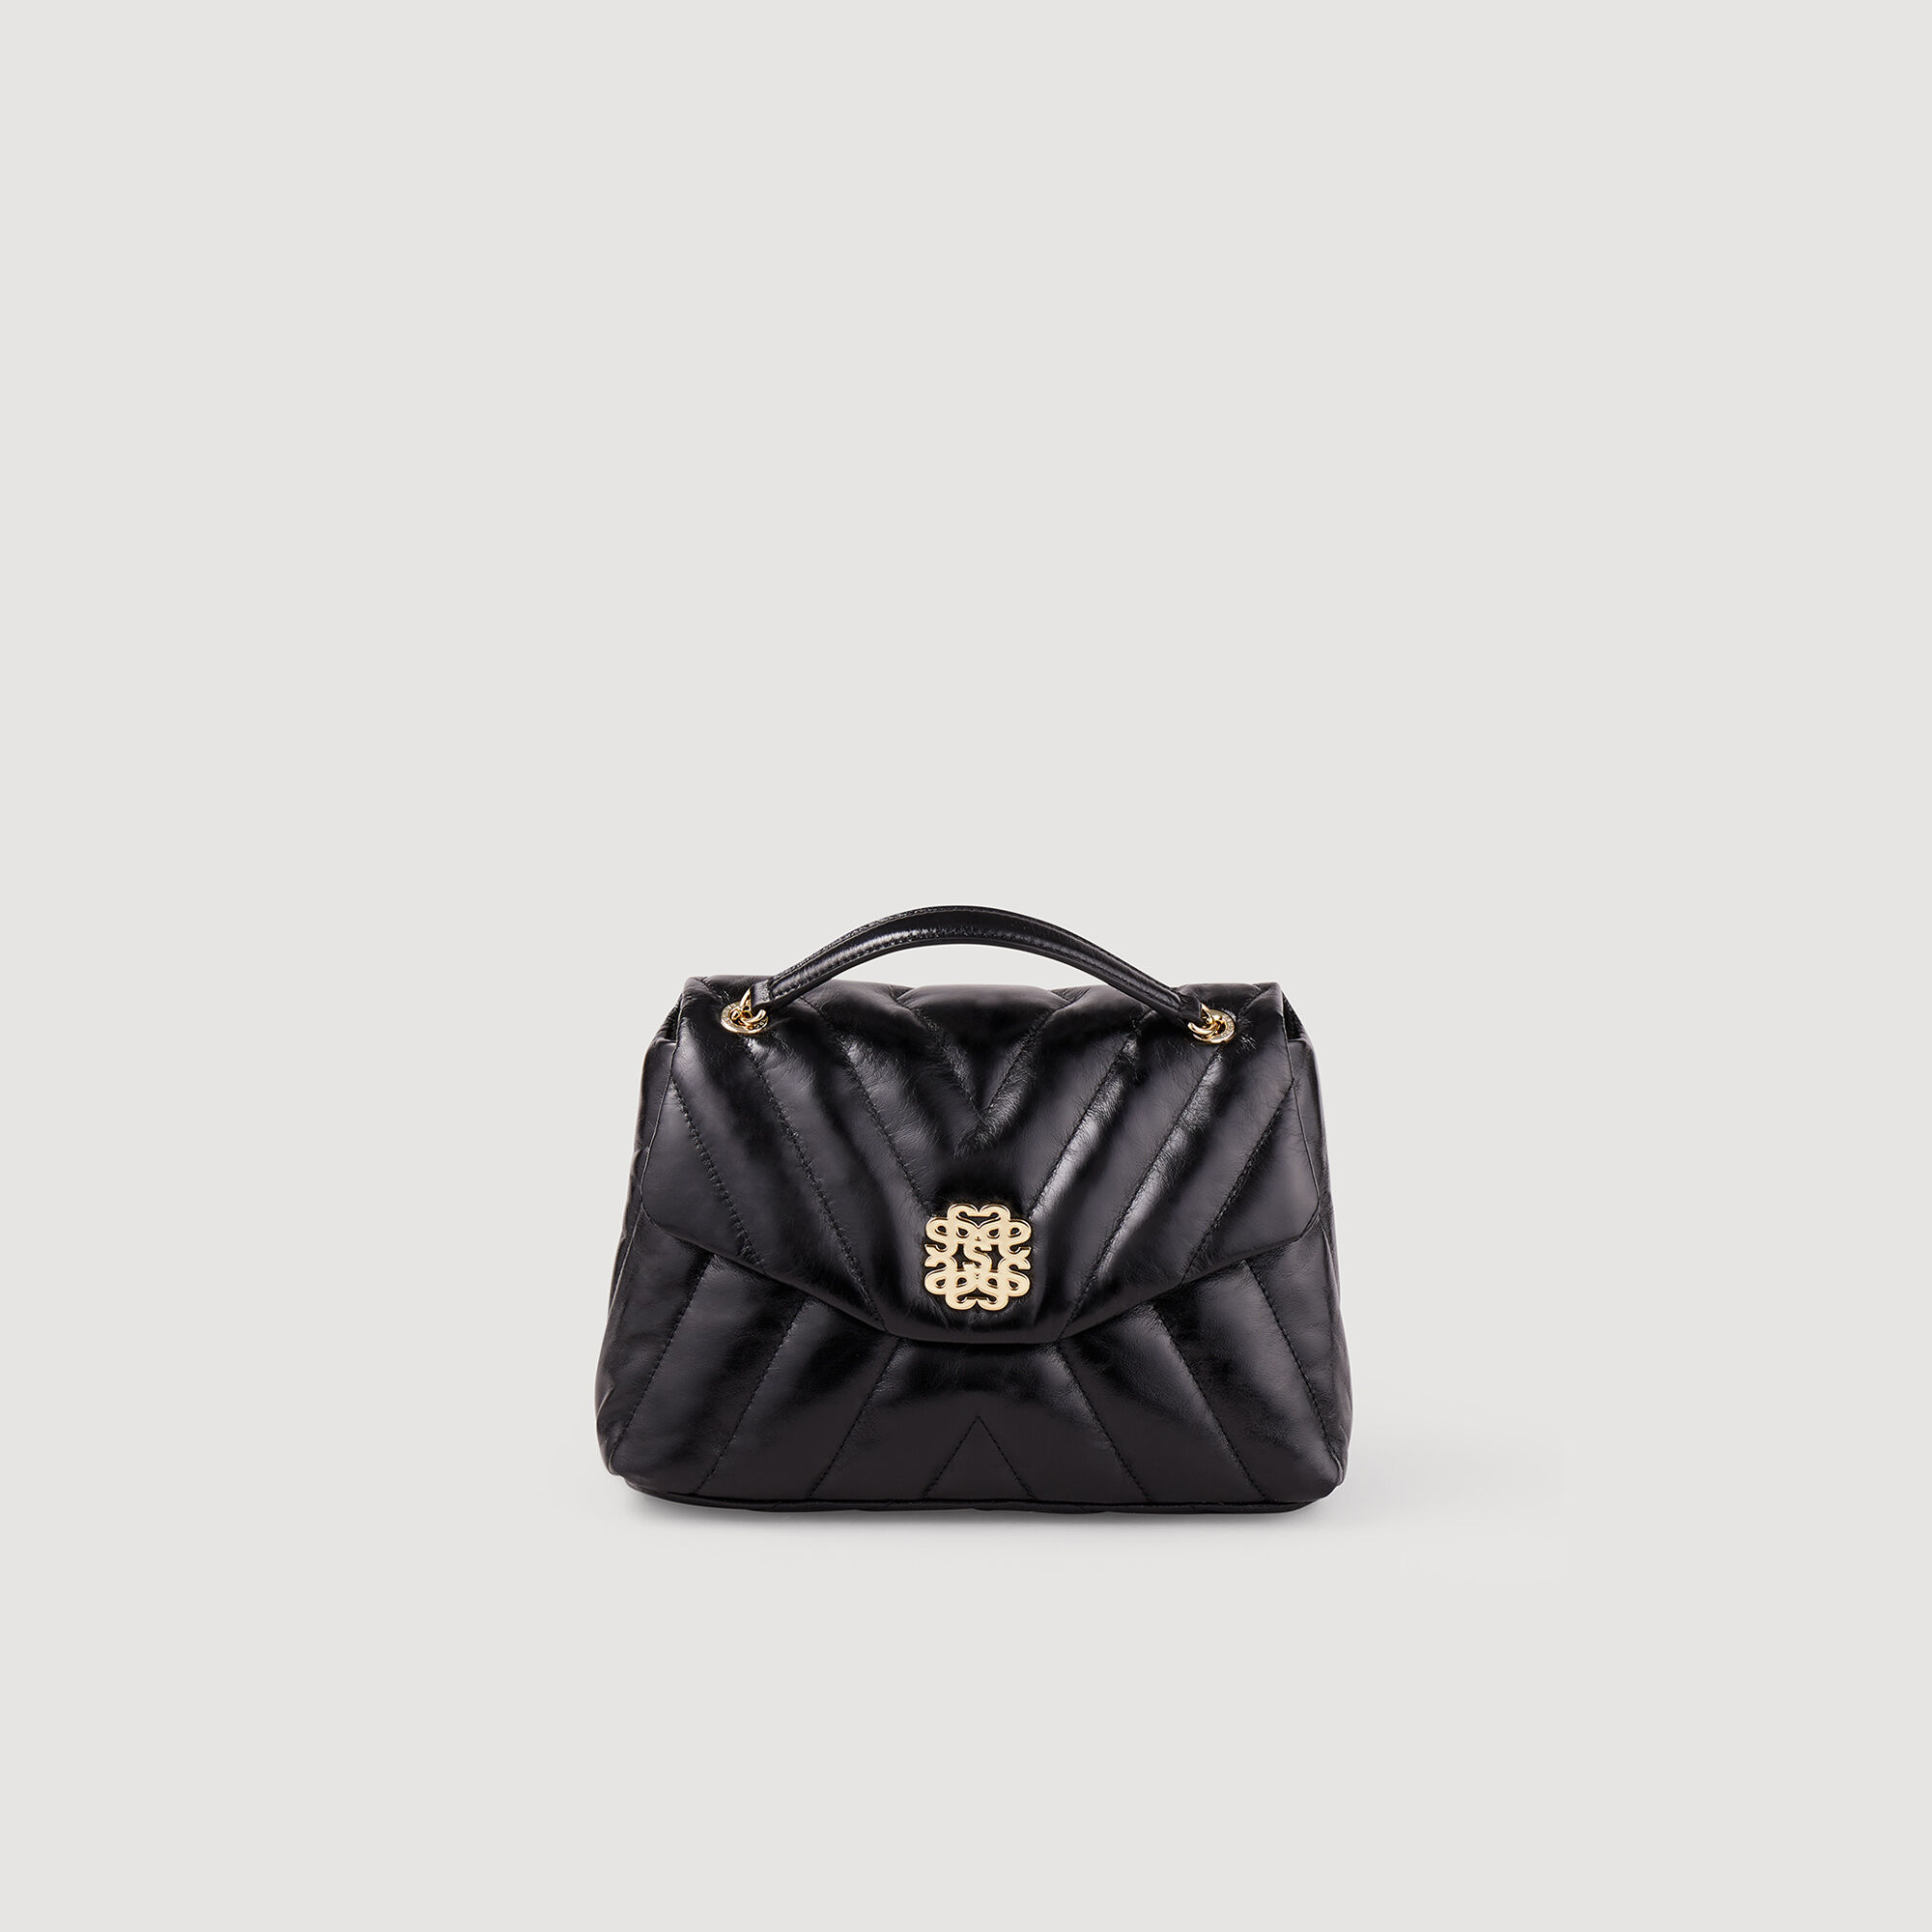 Mila quilted leather bag Black / Gray